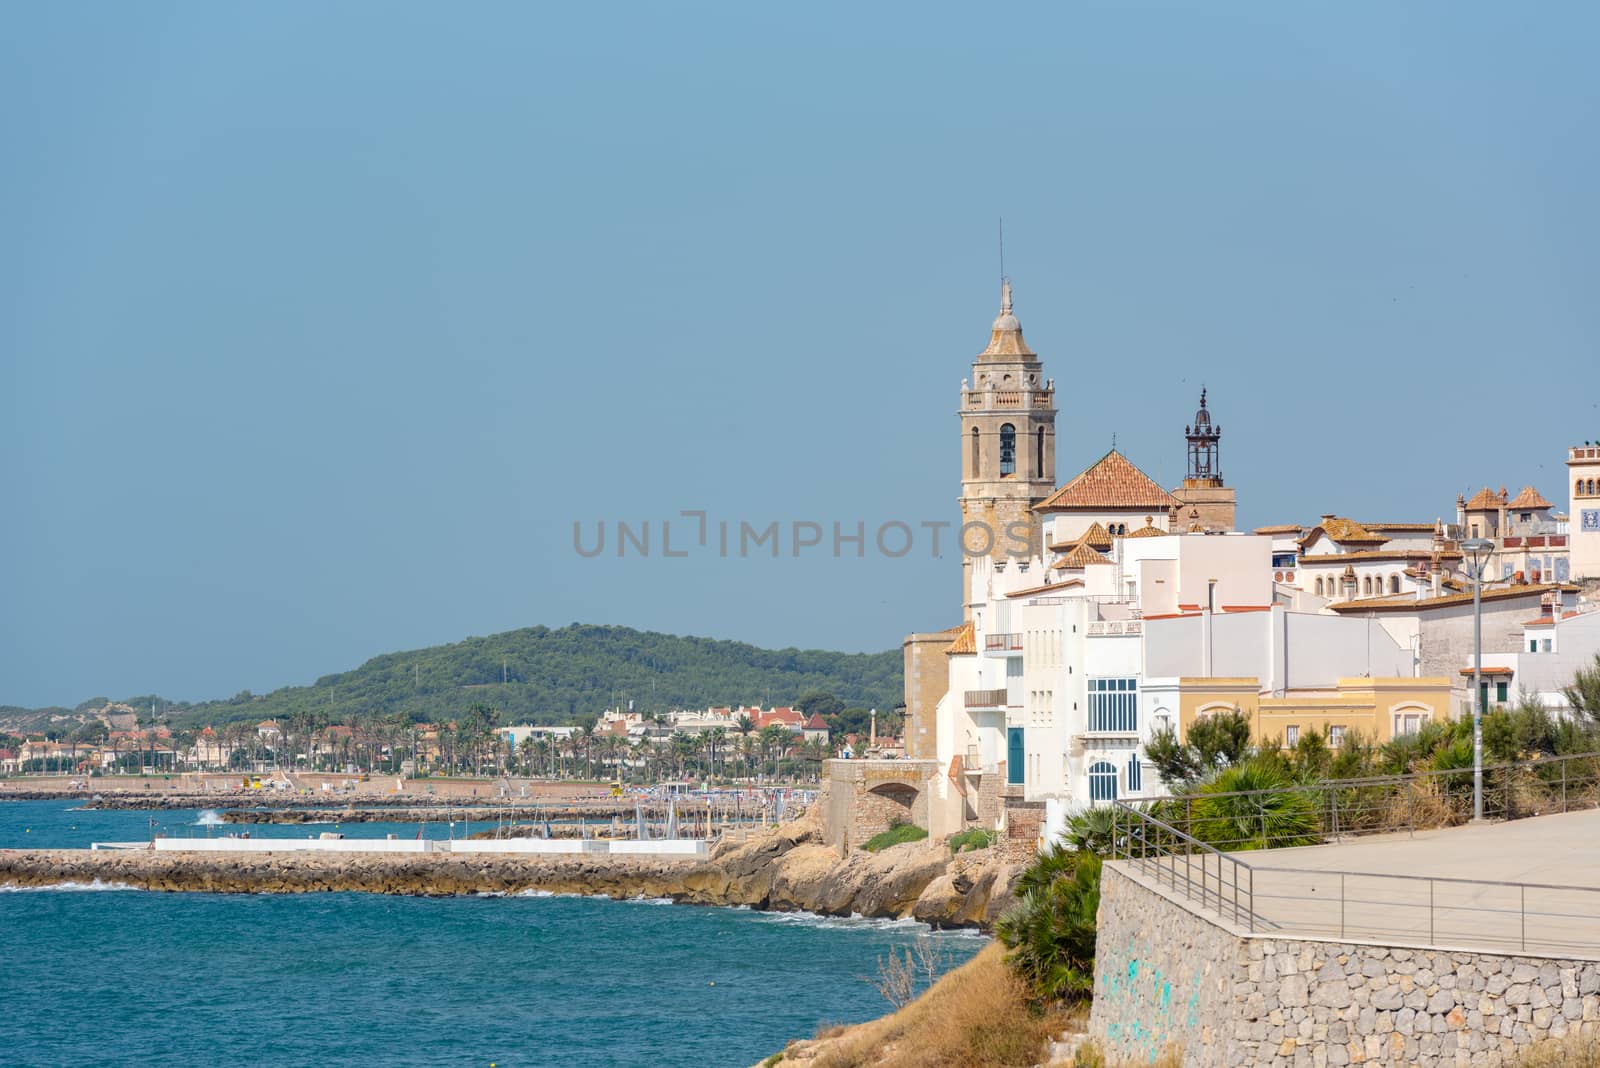 Sandy beach and historic old town in the Mediterranean complex S by martinscphoto